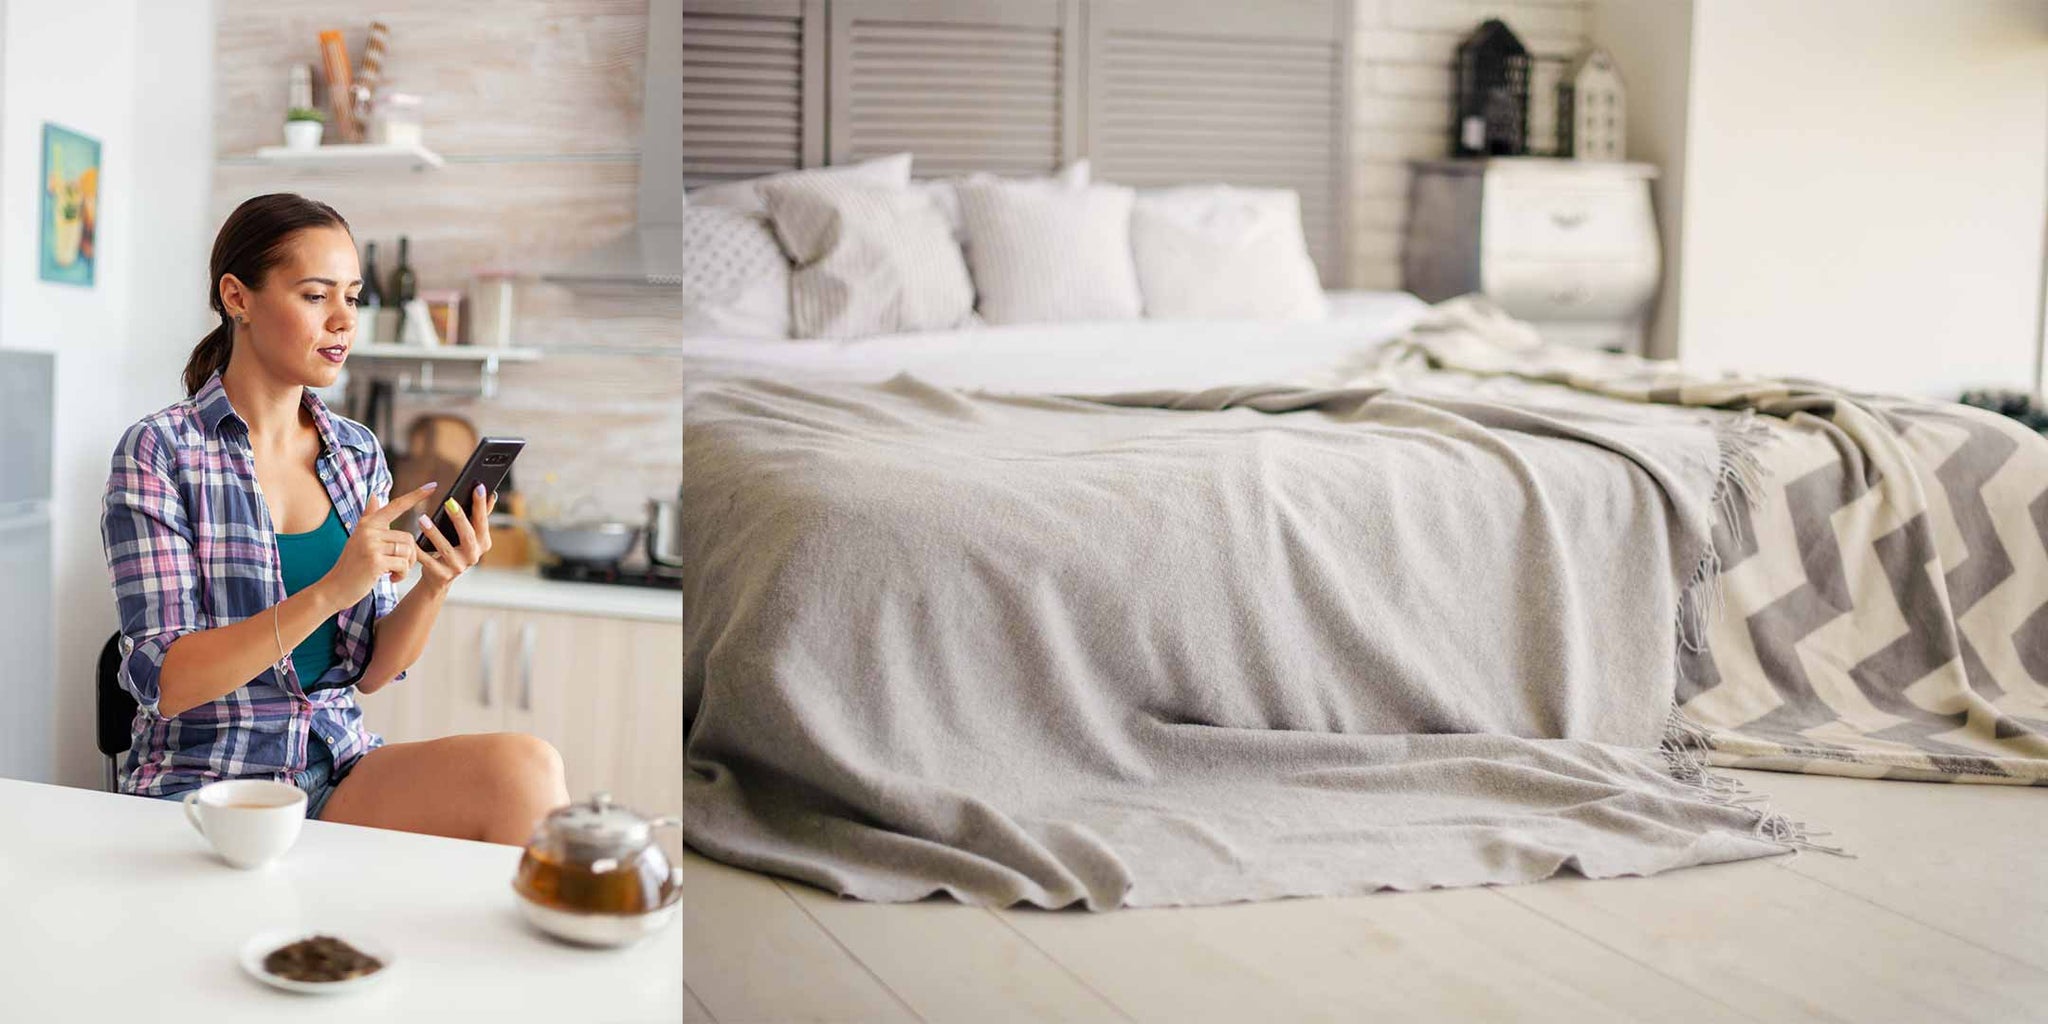 What to consider when buying a new mattress